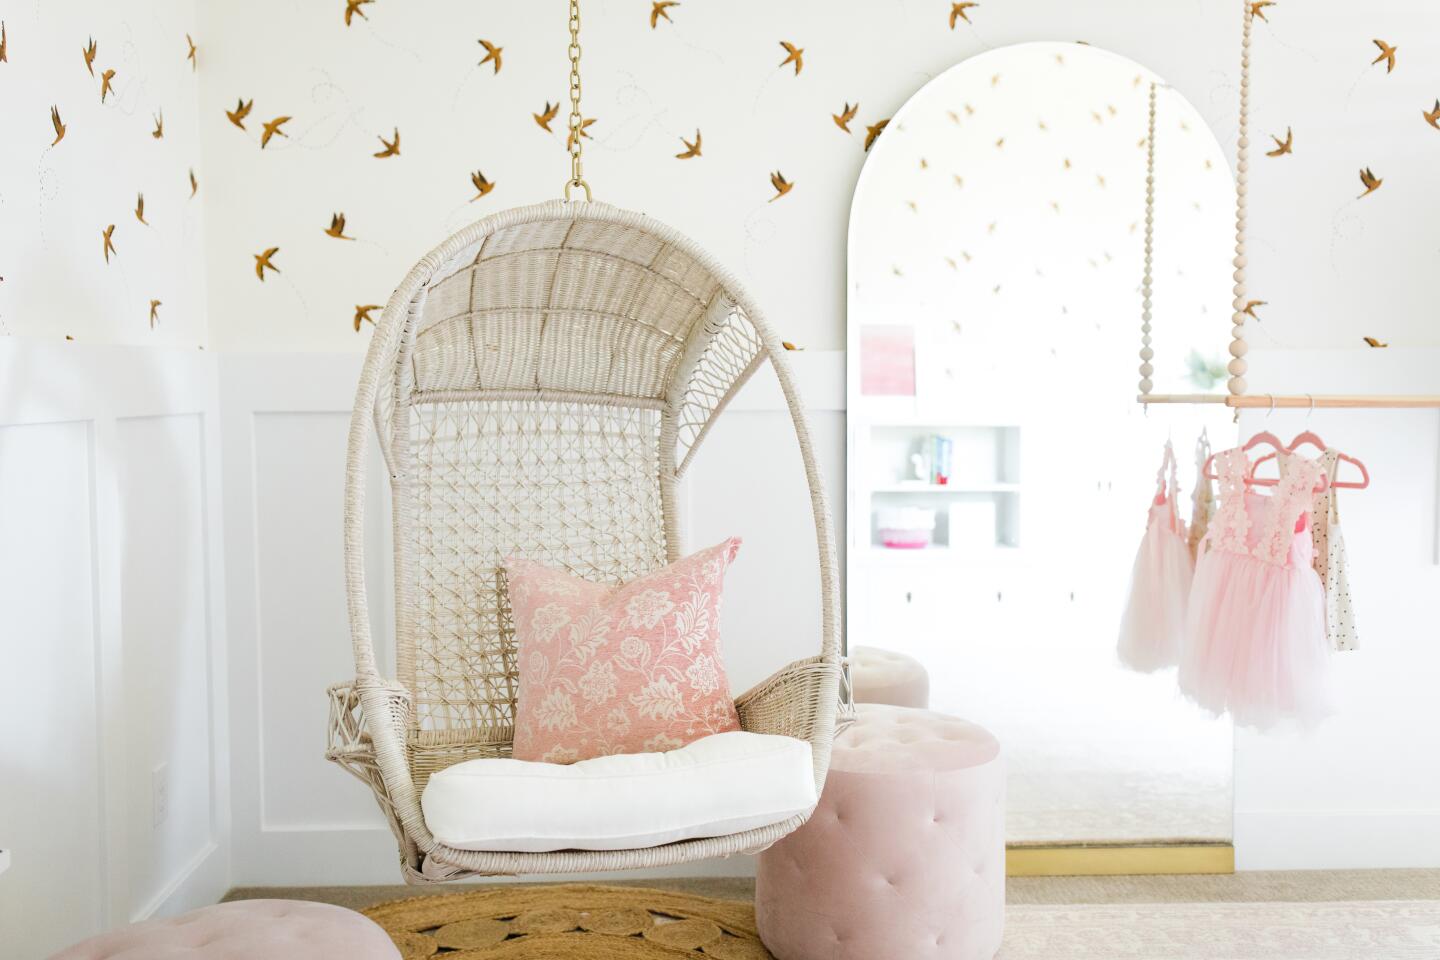 The playroom has pale pink accents, along with timeless wainscoting and wallpaper in a flying-sparrow pattern.